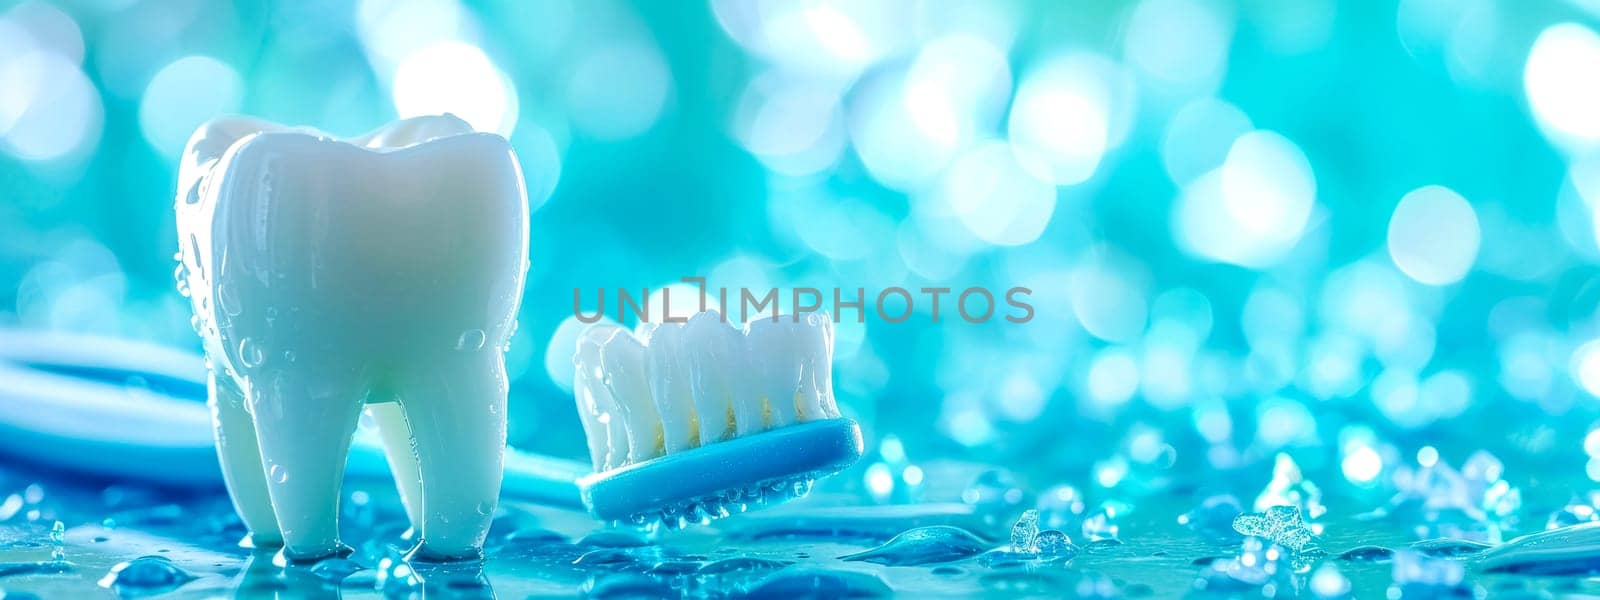 tooth model and a toothbrush, both covered in water droplets against a vibrant turquoise backdrop with light bokeh, emphasizing the importance of dental hygiene